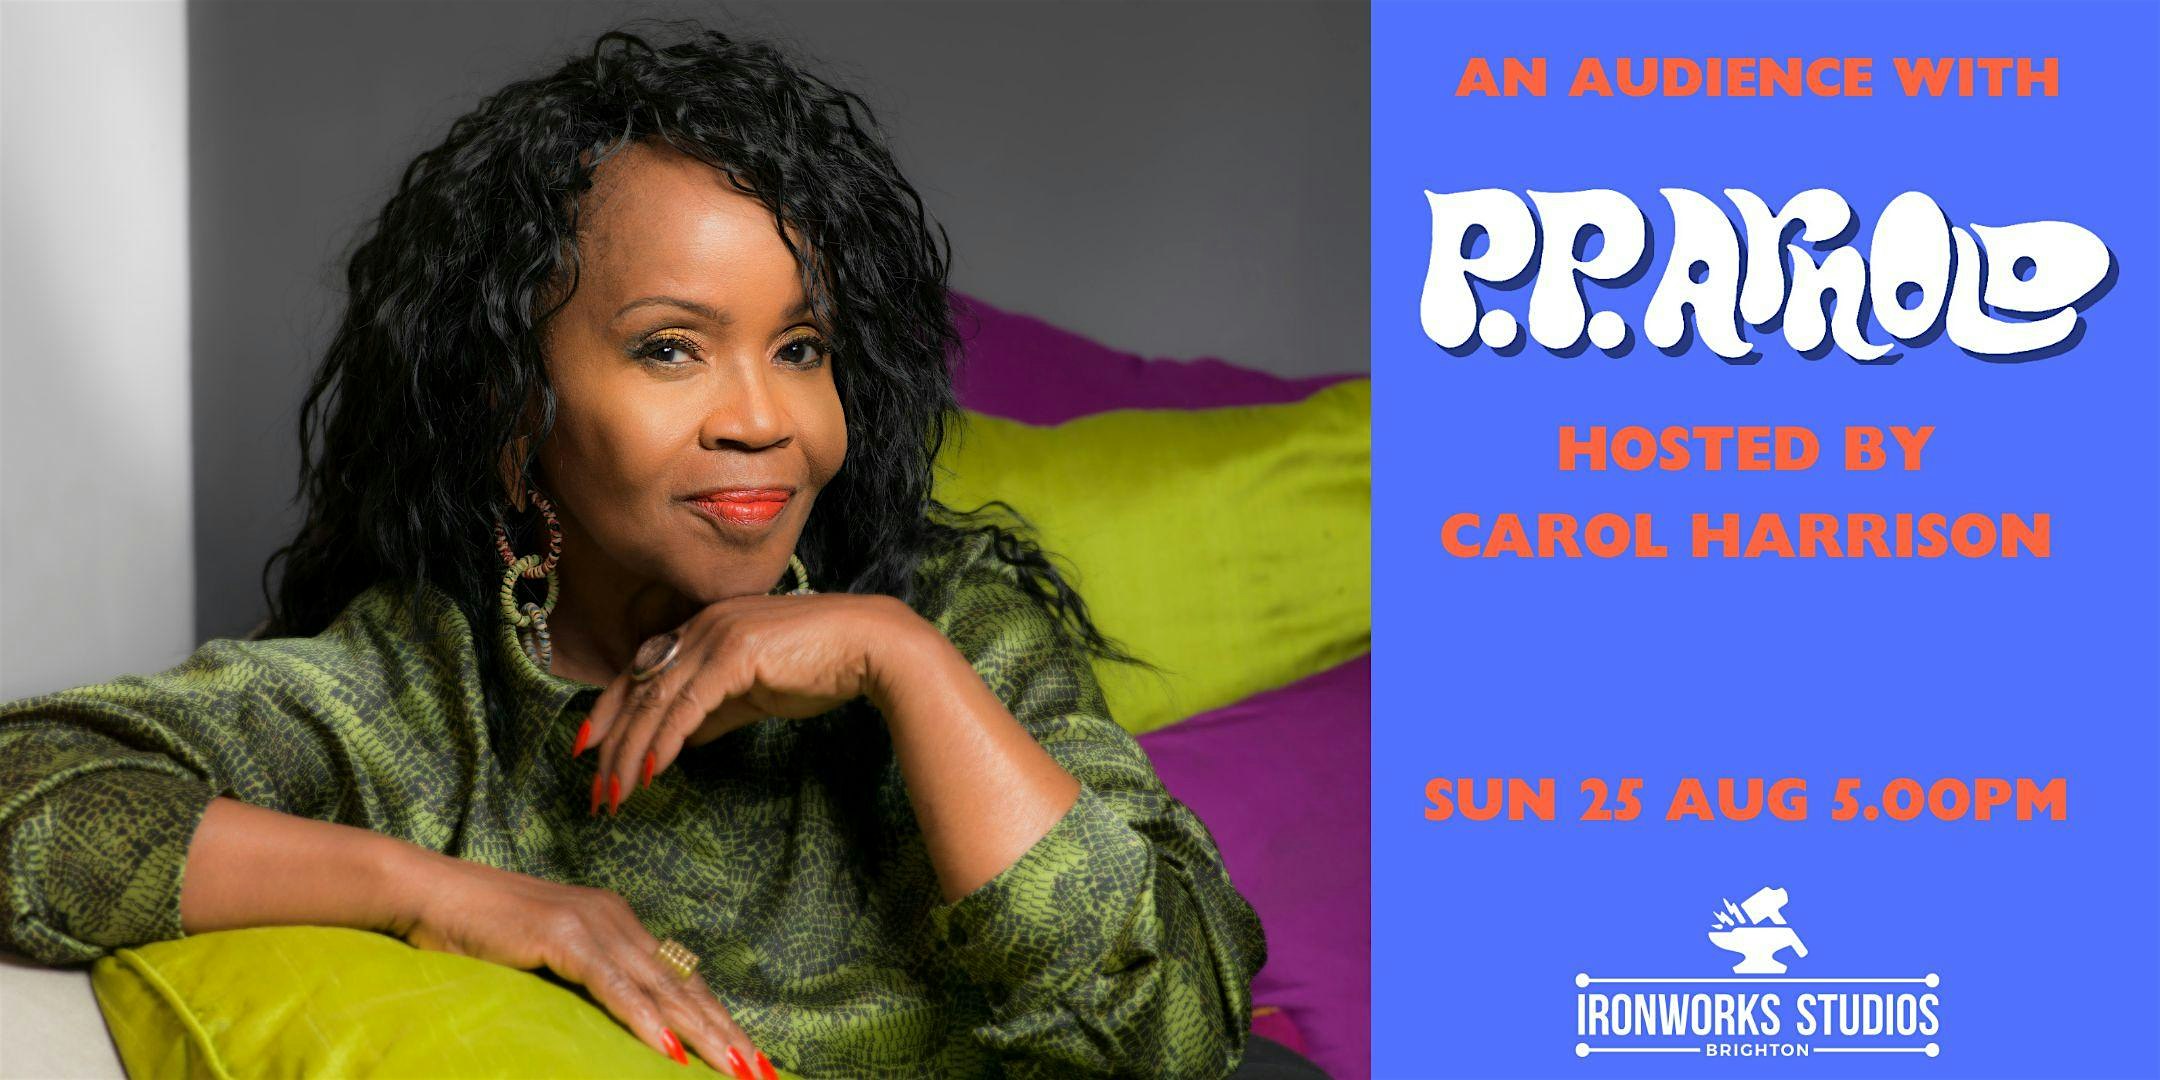 An Audience with P.P. Arnold